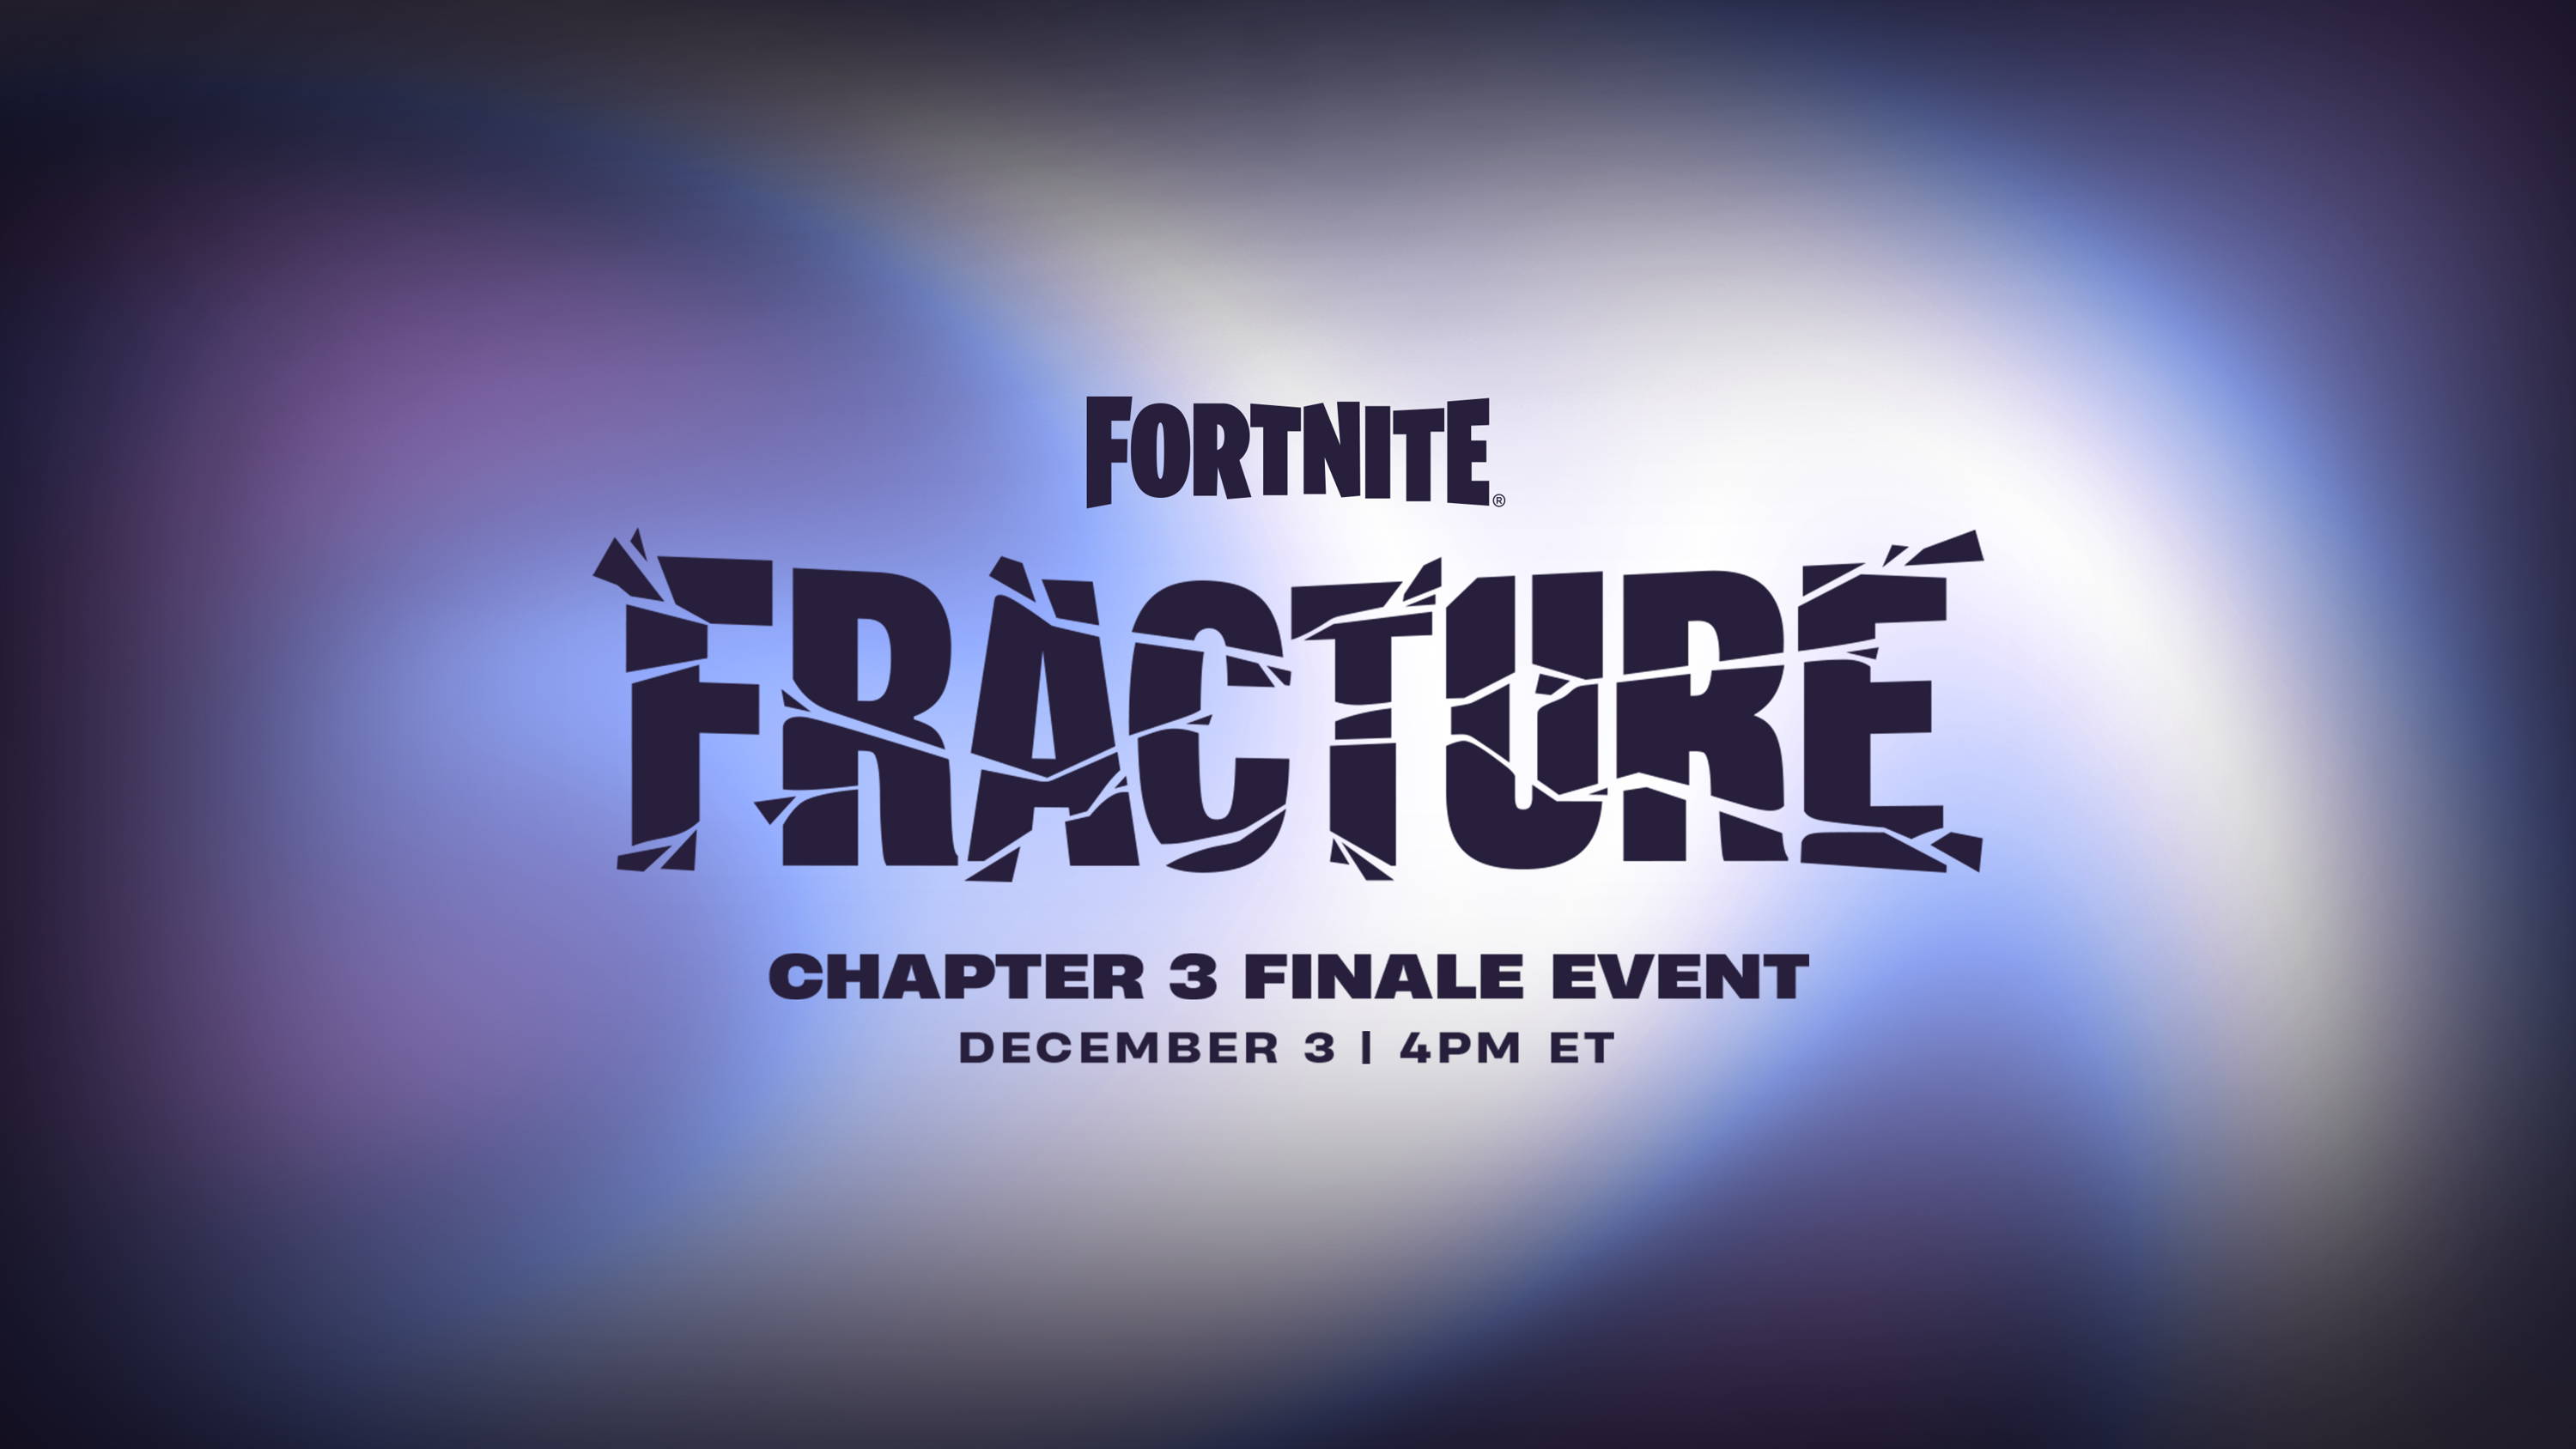 Fortnite Chapter 3 Finale Event: Start Date, Leaks, Rumors, Chapter 4 and More